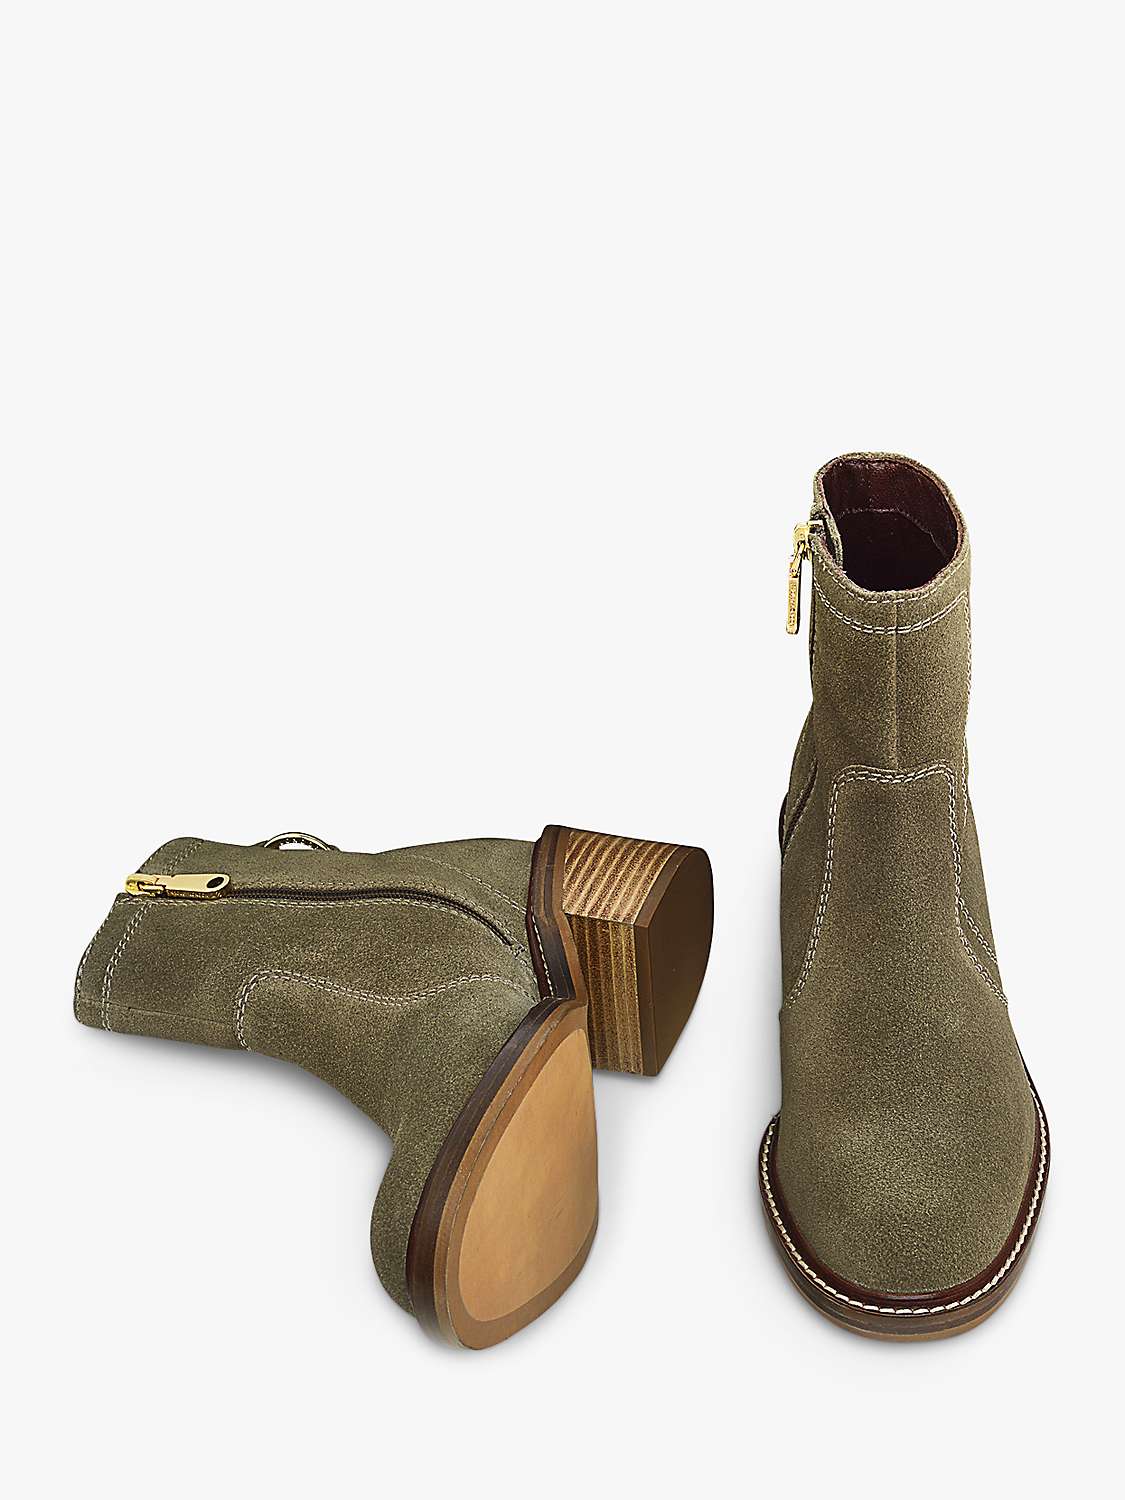 Buy Radley New Street Suede Ankle Boots Online at johnlewis.com